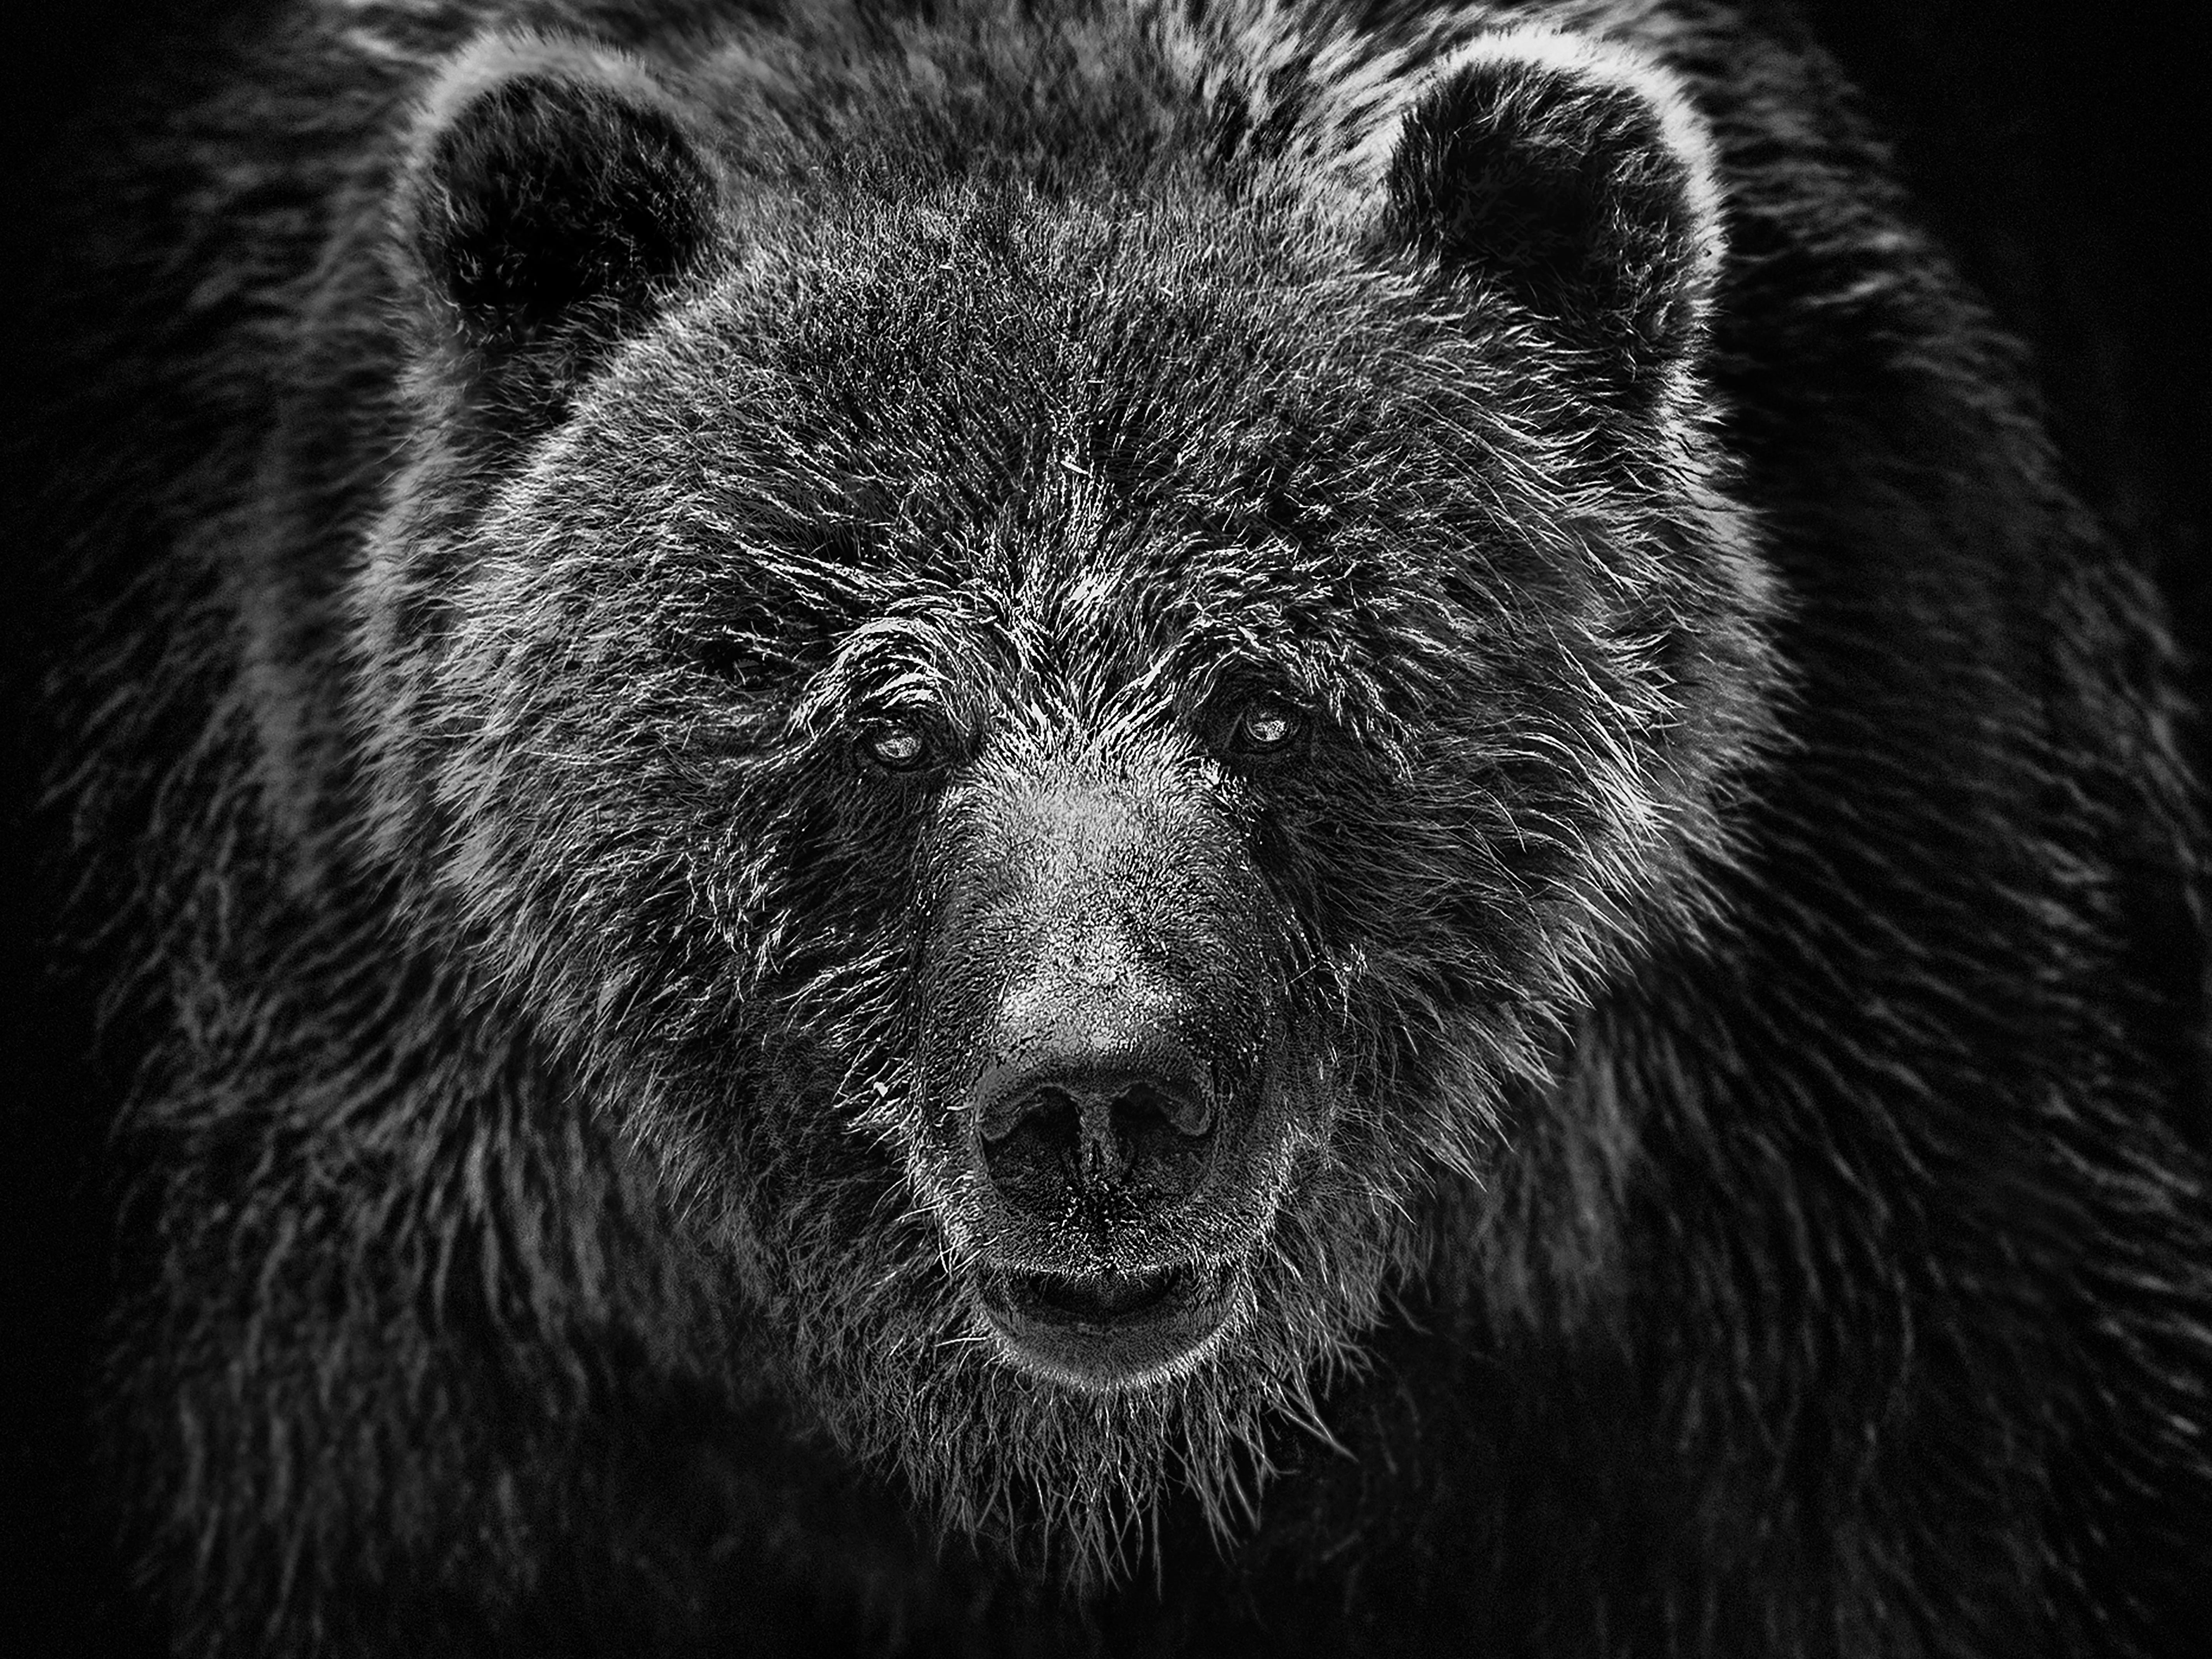 Shane Russeck Black and White Photograph - "Grizzly Portrait" 36x48 - Black and White Fine Art  Photography Grizzly Bear 